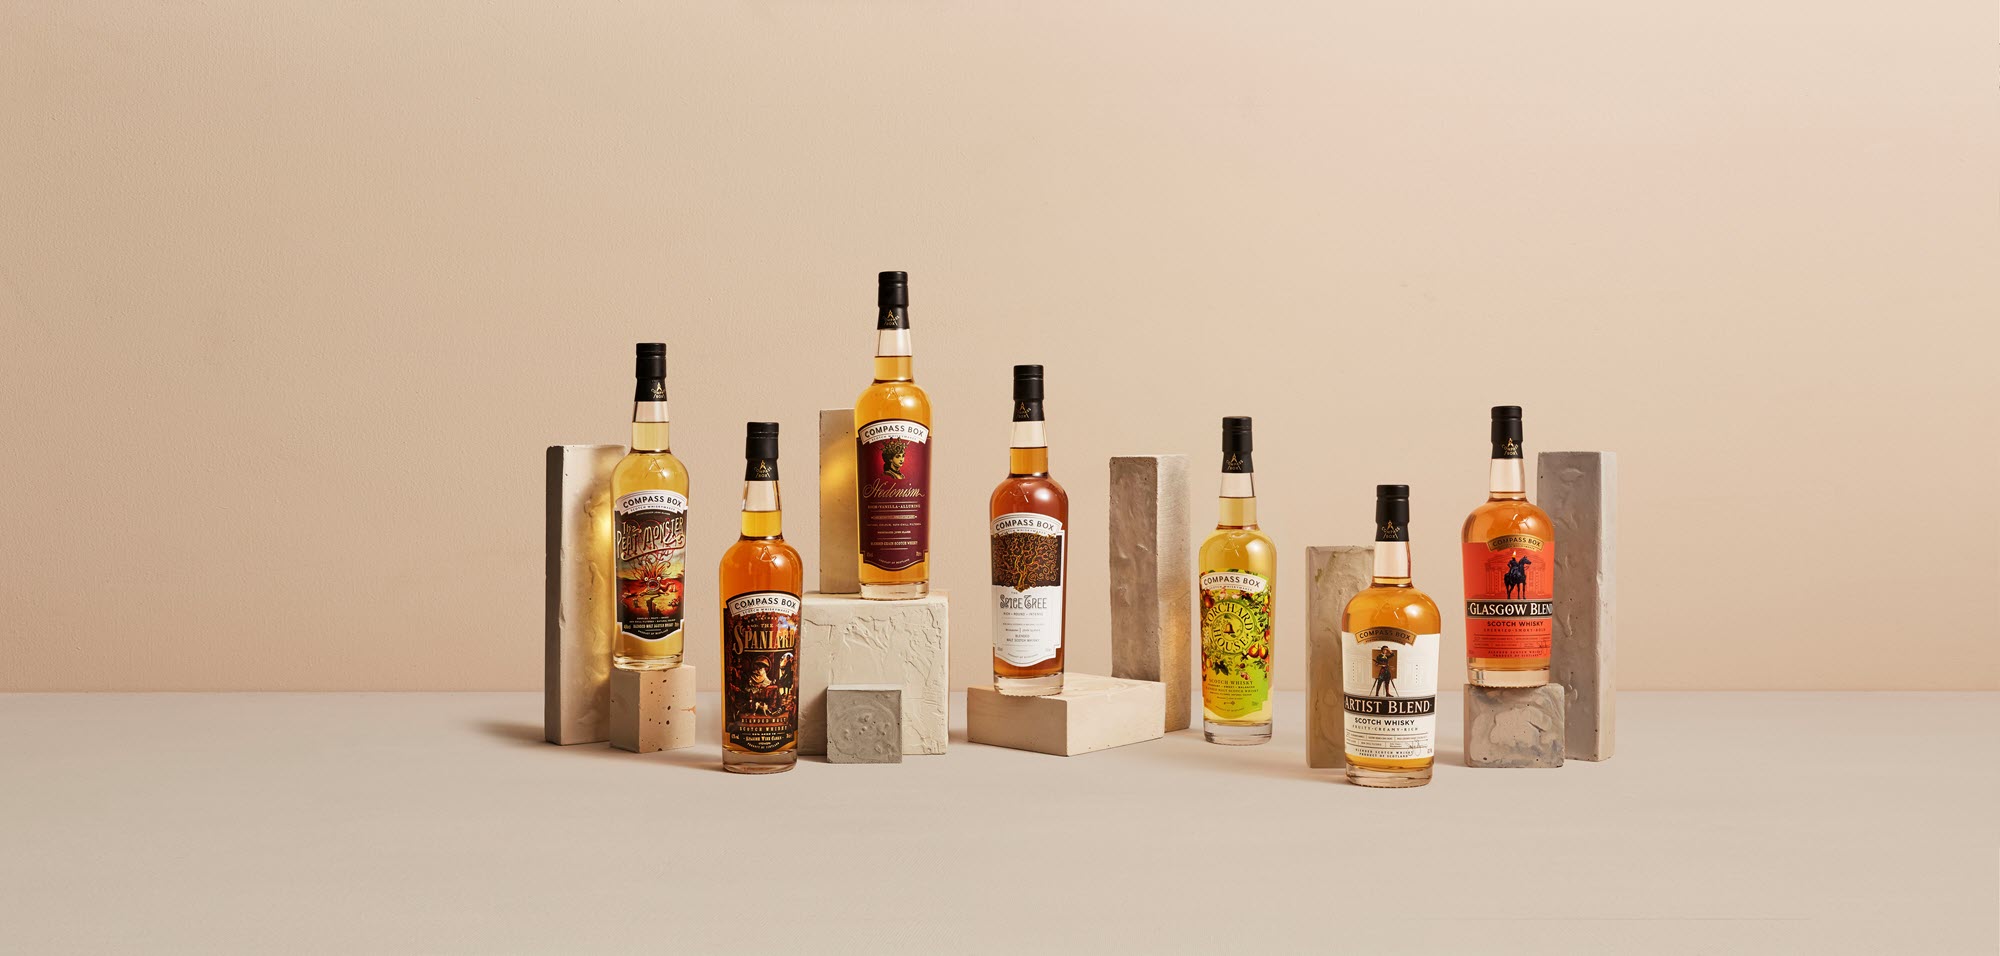 (The Compass Box core range) Headed by grain whisky Hedonism, Compass Box is proving blends can match up with the best of the single malts